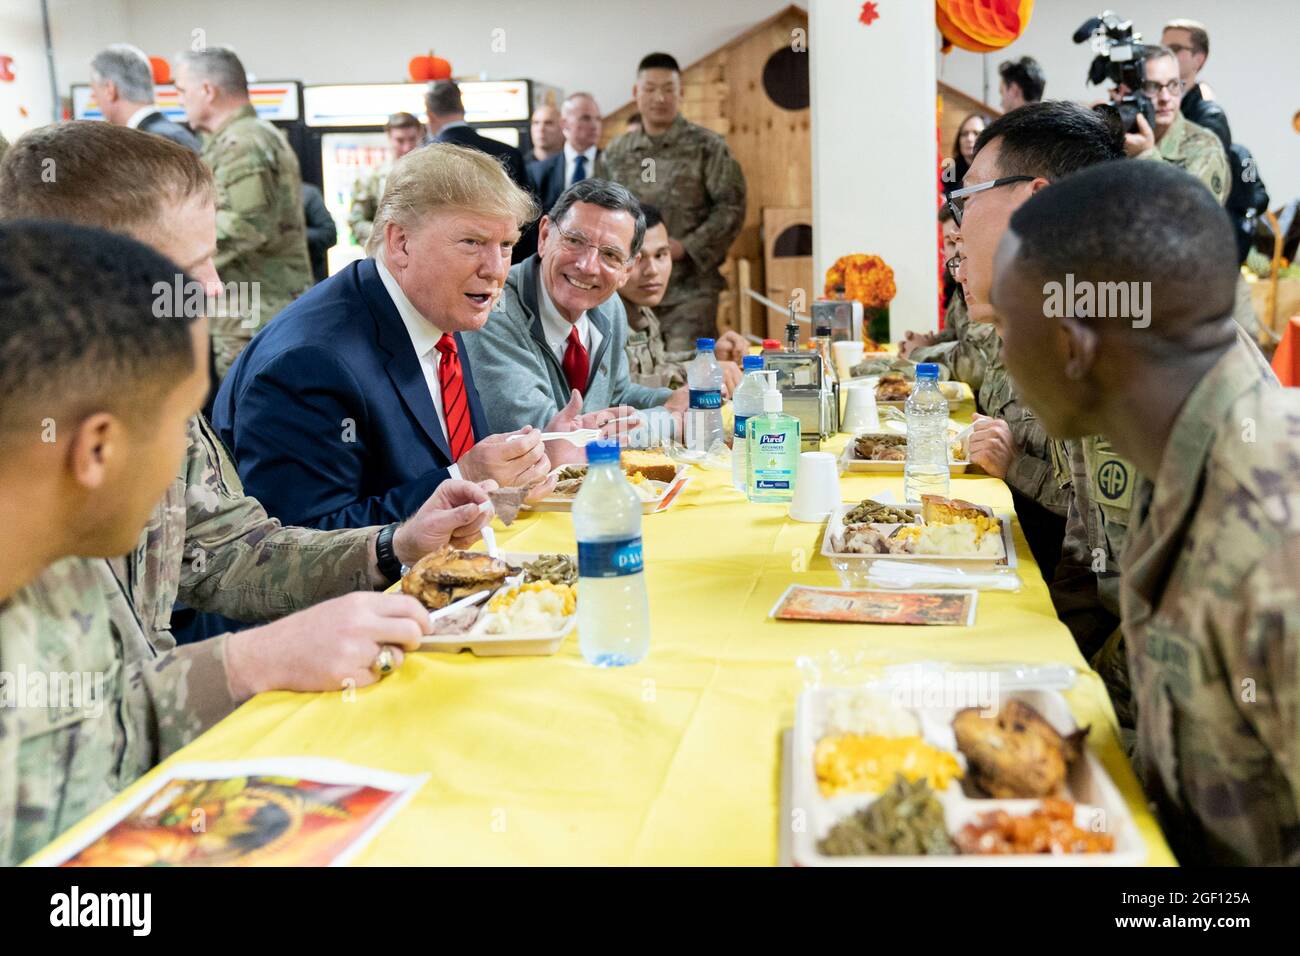 President Donald J. Trump visits troops at Bagram Airfield on Thursday, November 28, 2019, in Afghanistan, during a surprise visit to spend Thanksgiving with troops.  (Official White House Photo by Shealah Craighead) Stock Photo